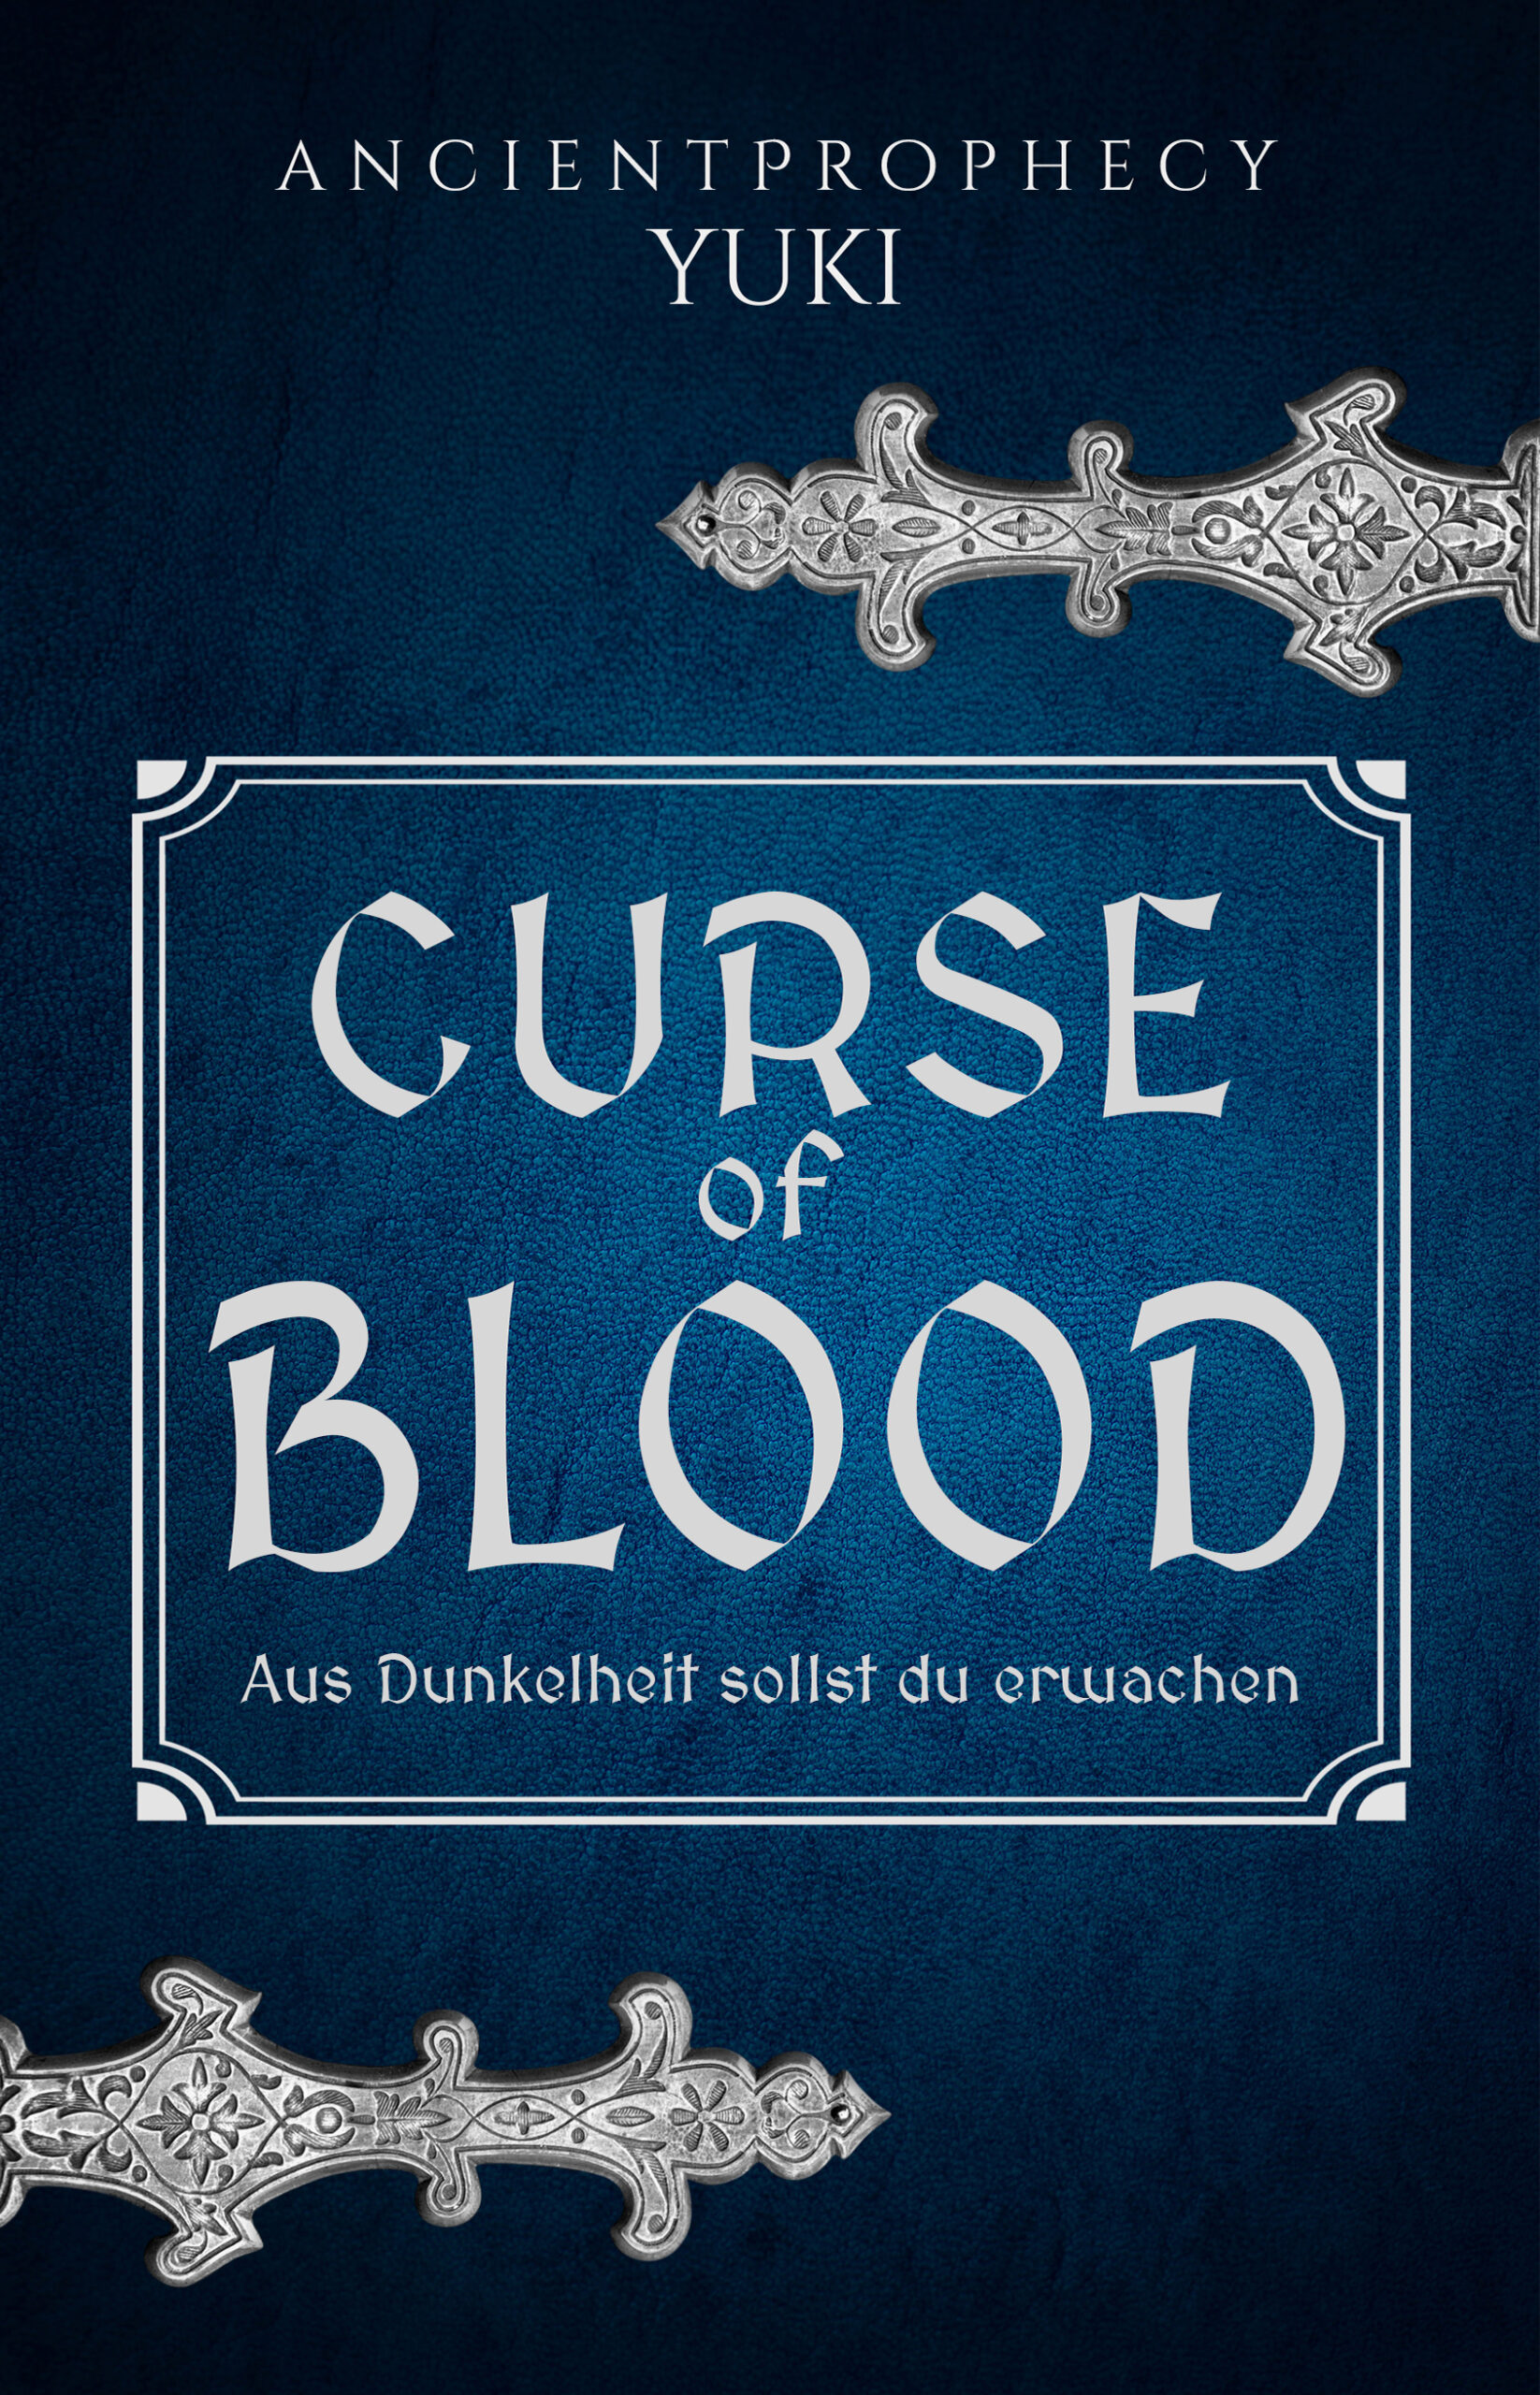 CURSE OF BLOOD